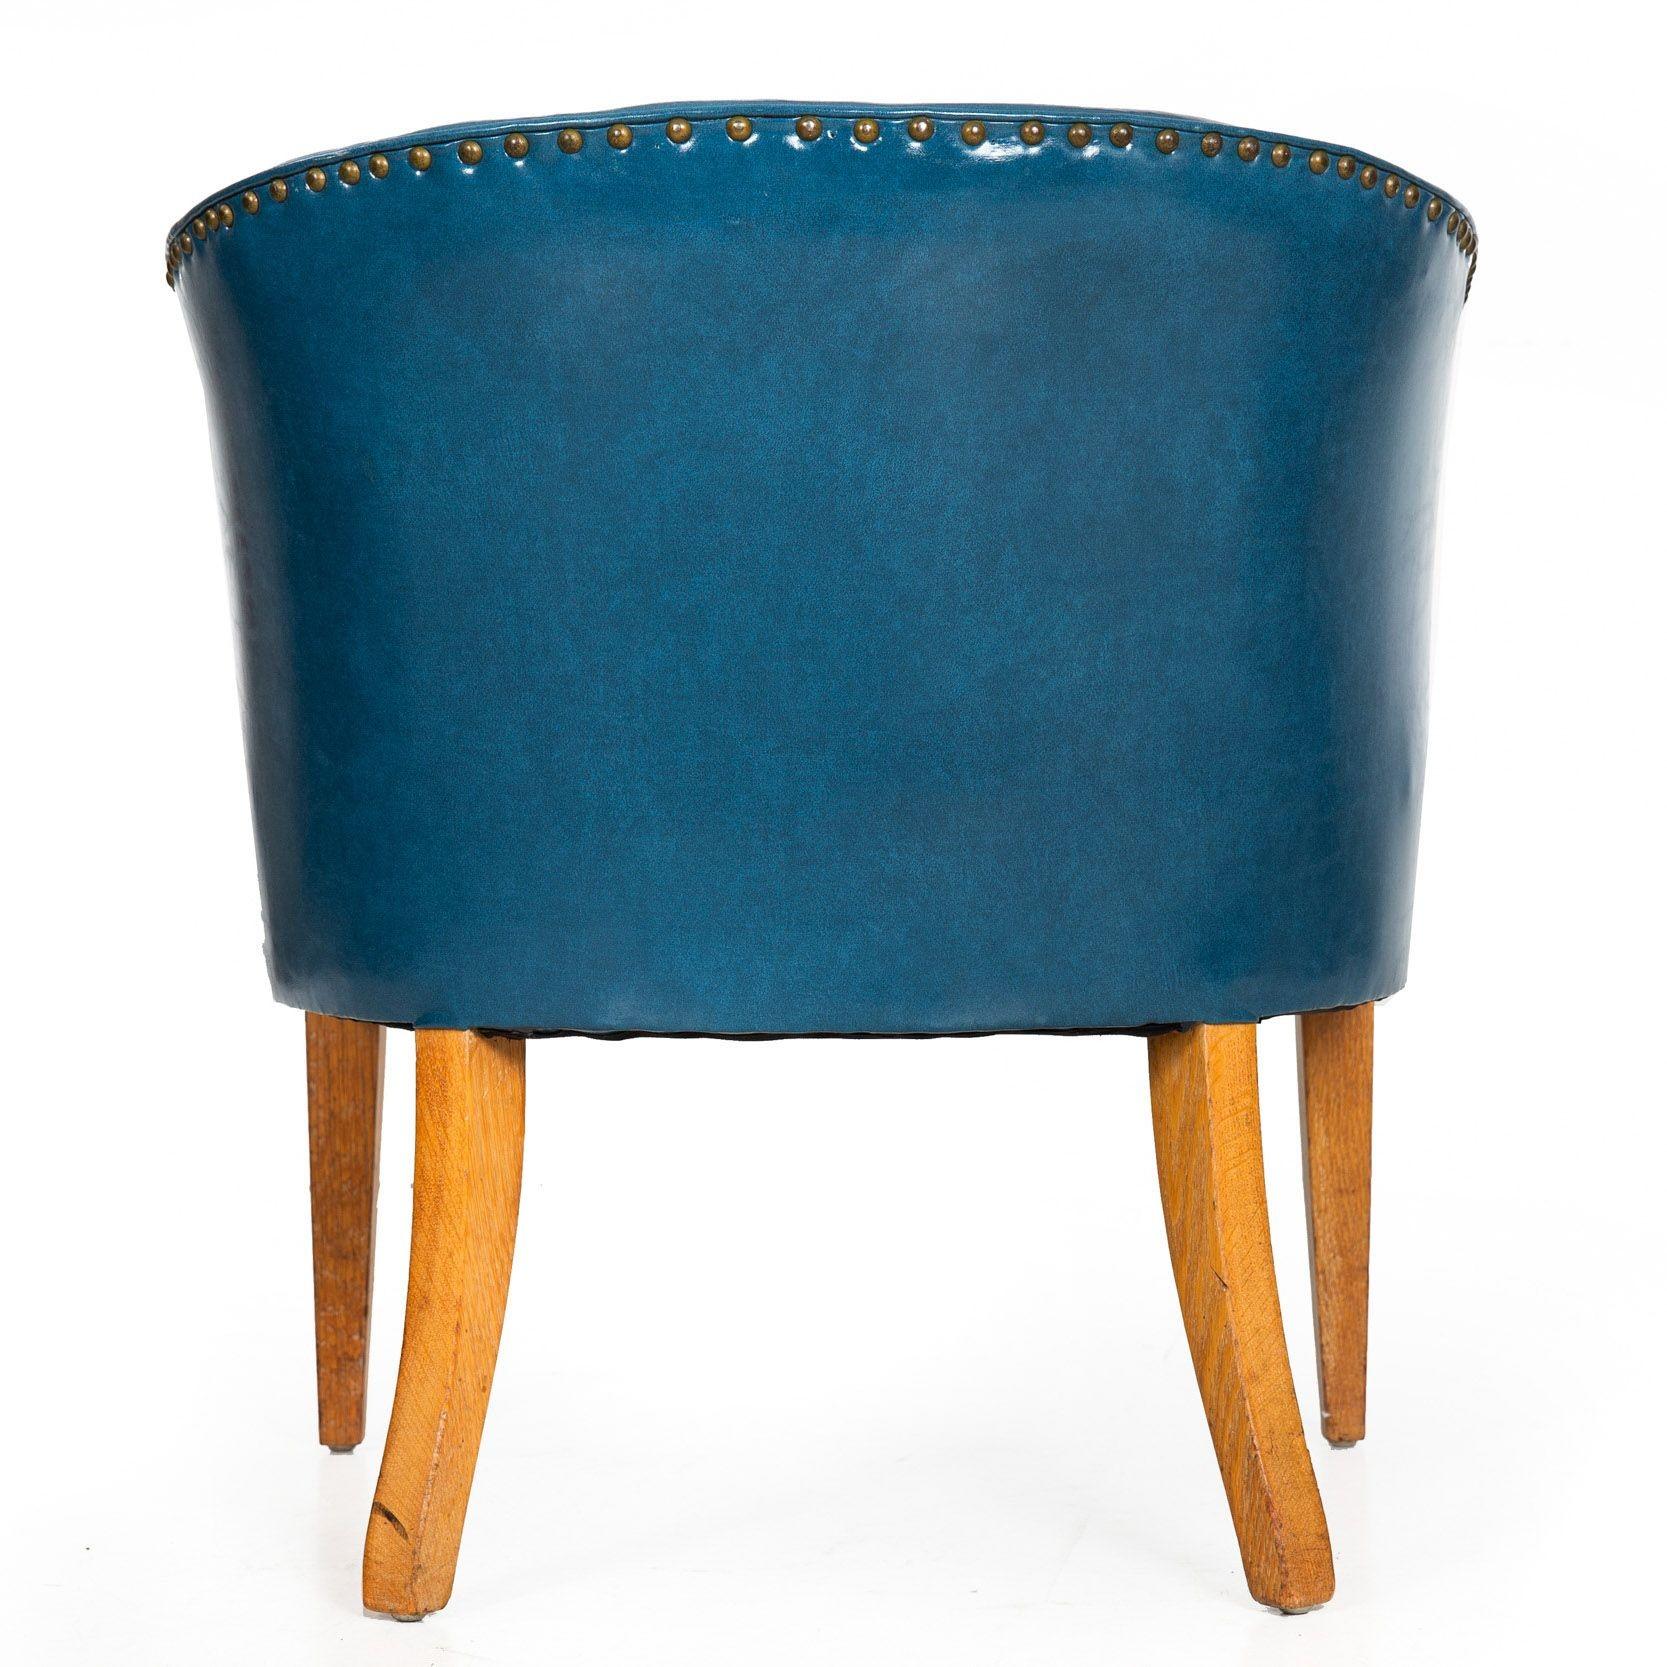 20th Century Mid-Century Modernist White Oak Tub Arm Chair in Blue Faux-Leather For Sale